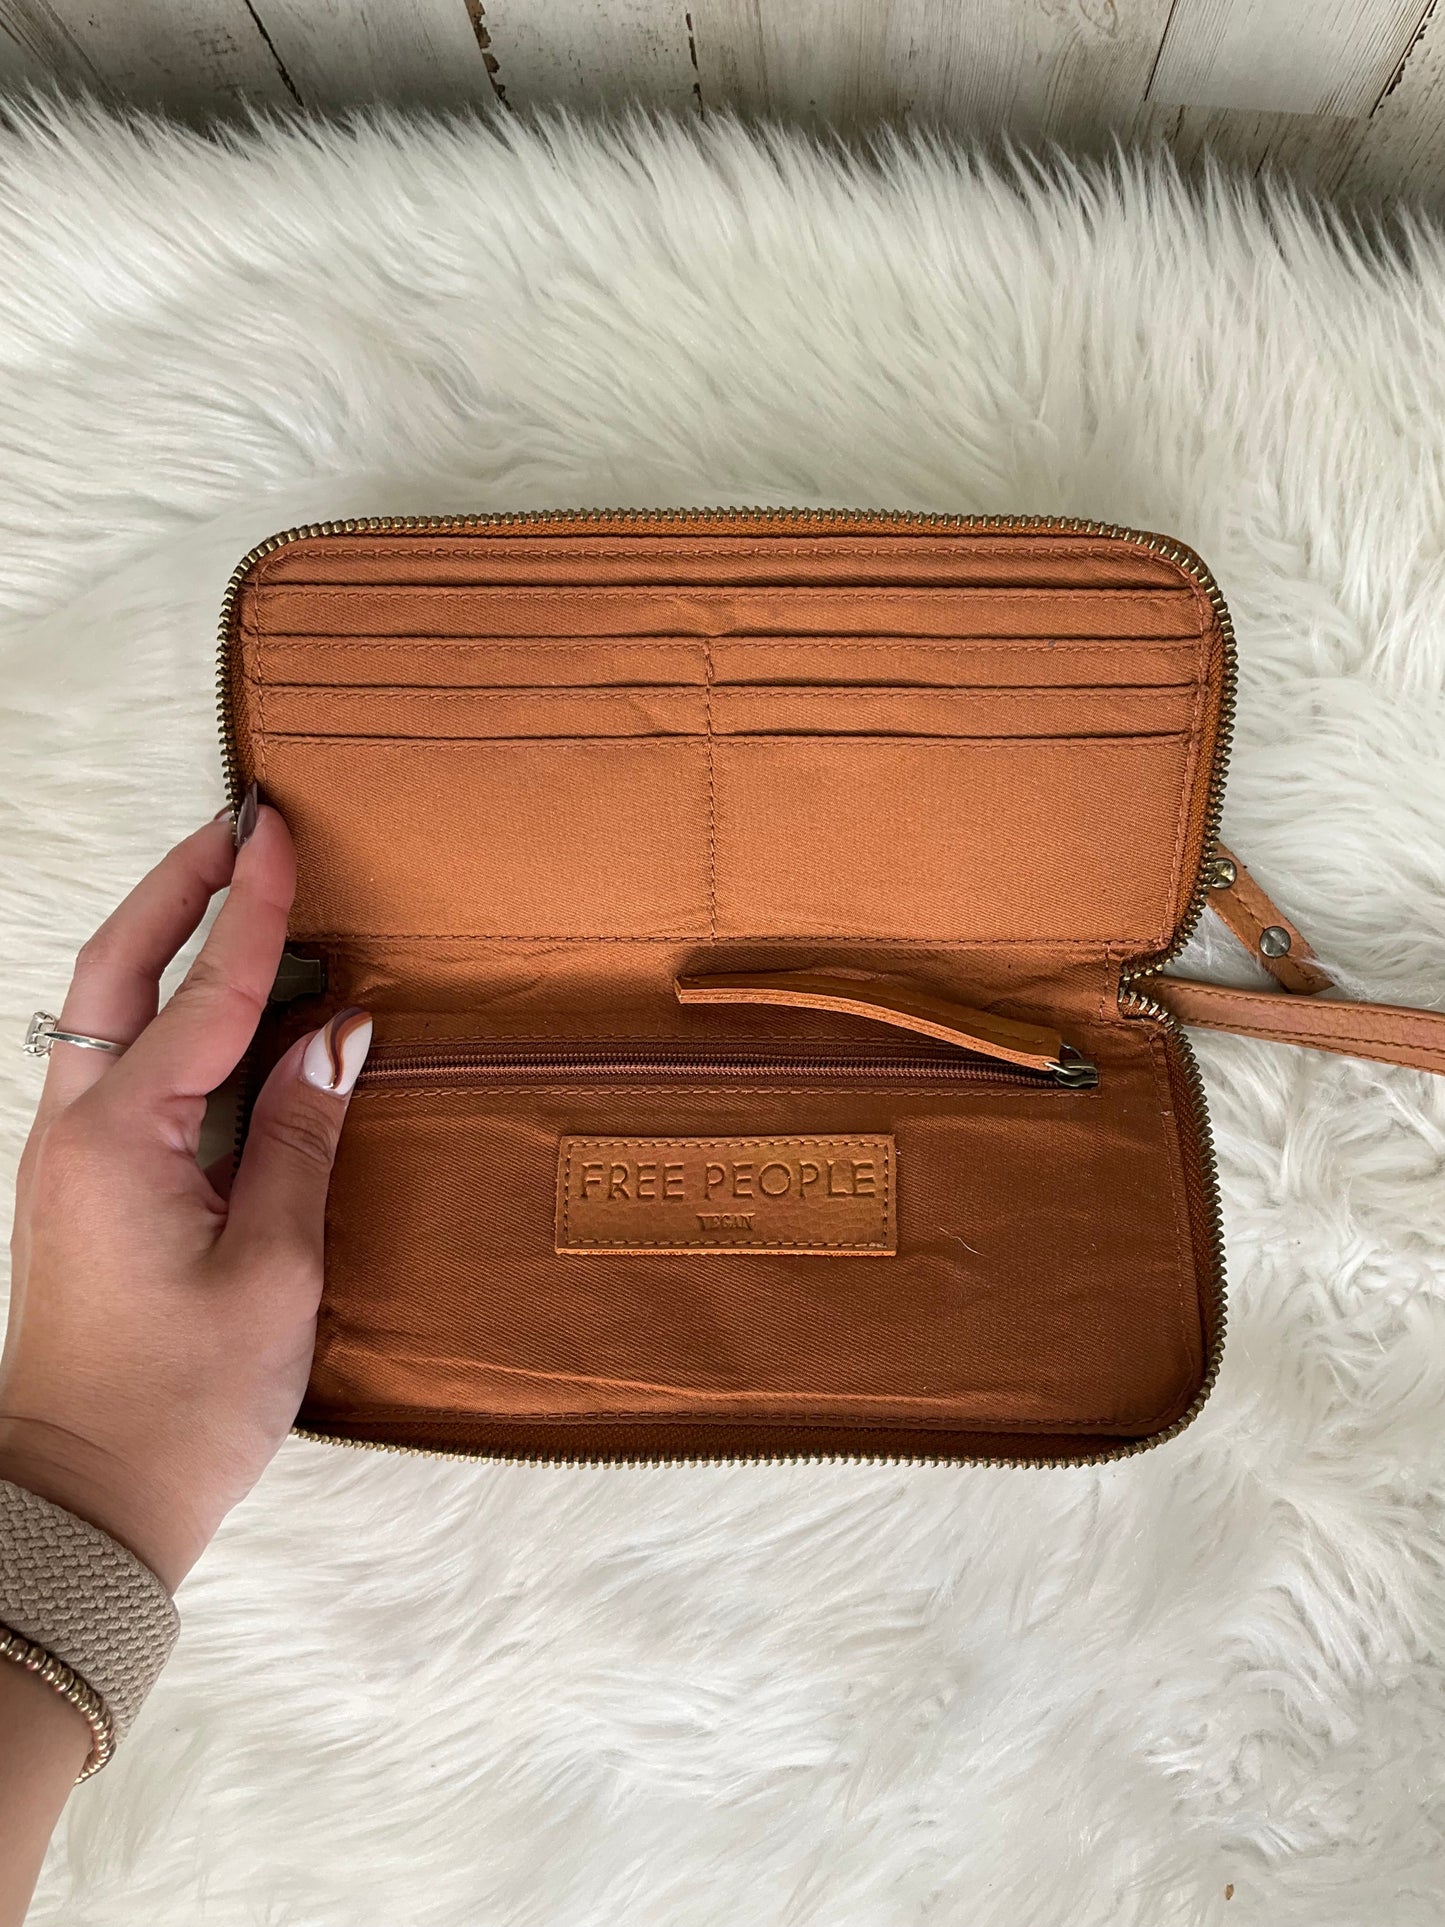 Wallet By Free People  Size: Medium